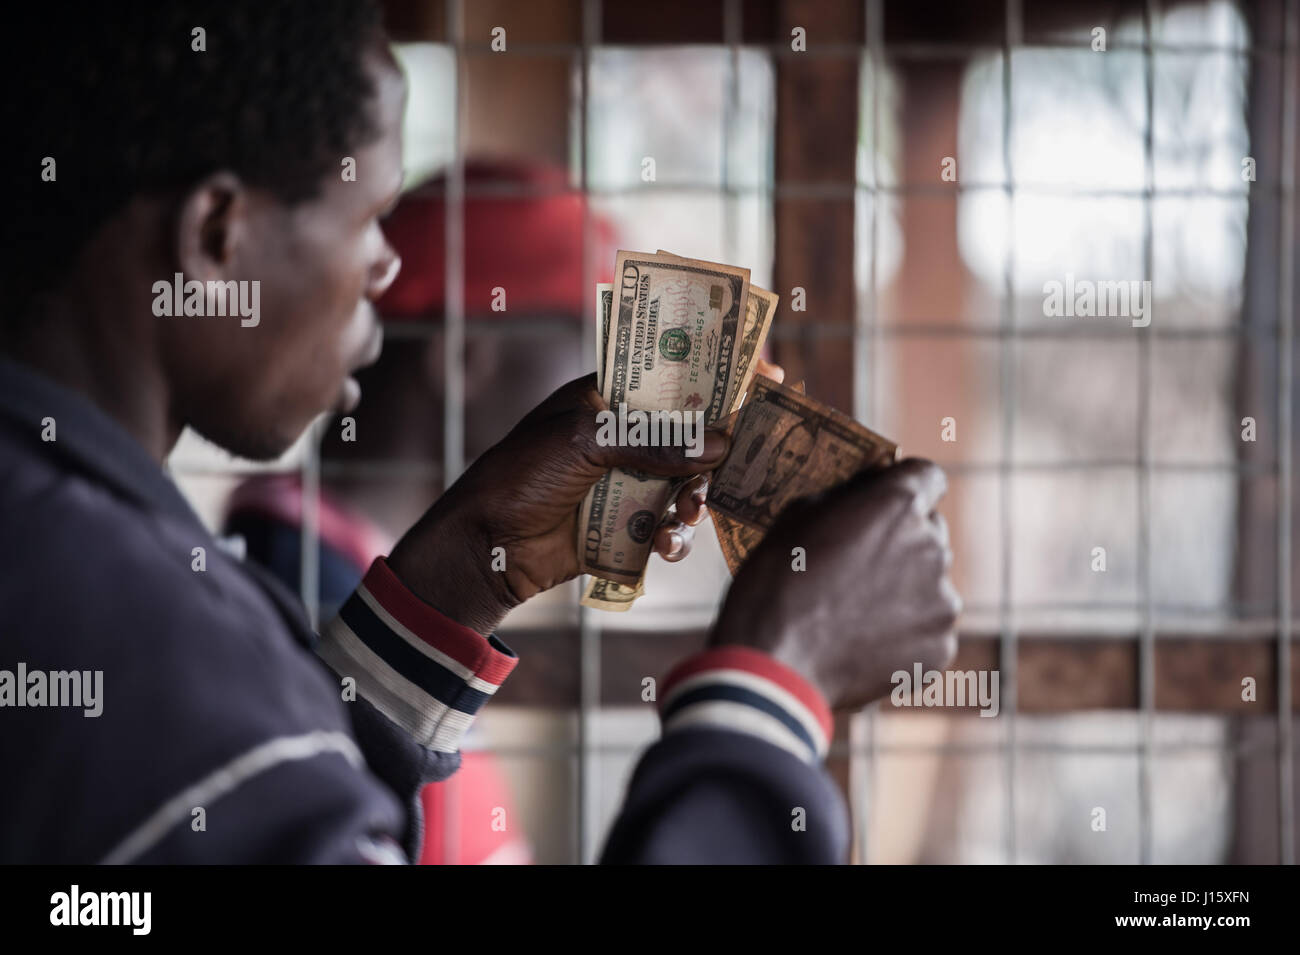 A former militia member examines US currency given to him as part of his demobilization package in Goma, Democratic Republic of Congo Stock Photo